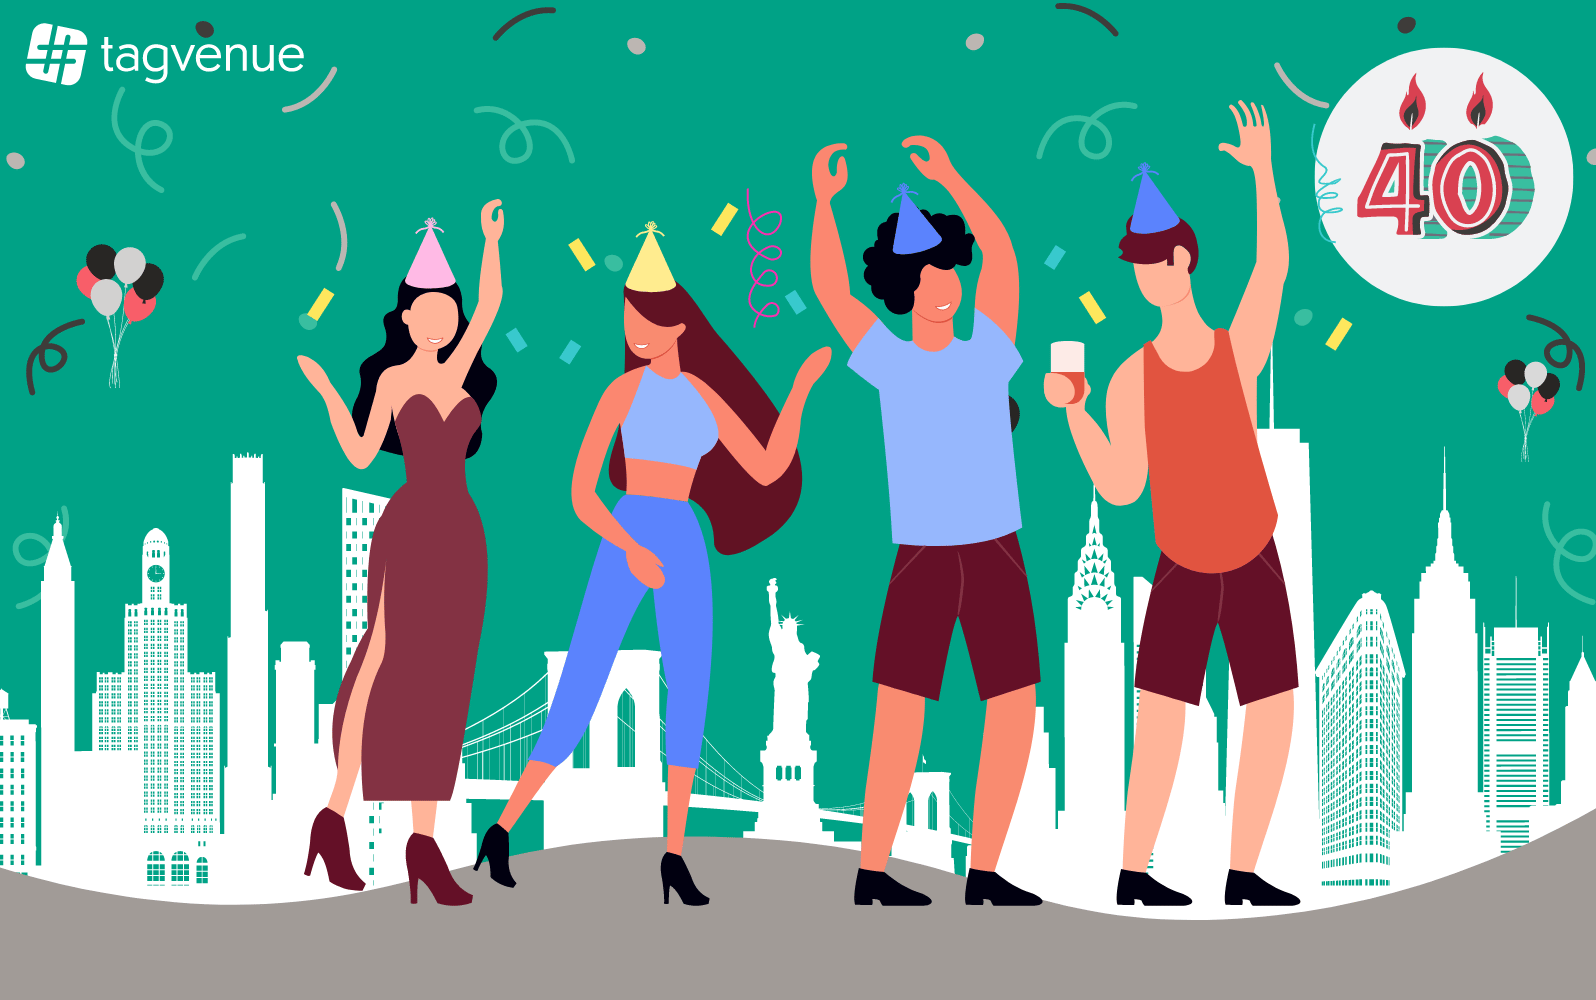 9 Things to Do for Your 40th Birthday in NYC